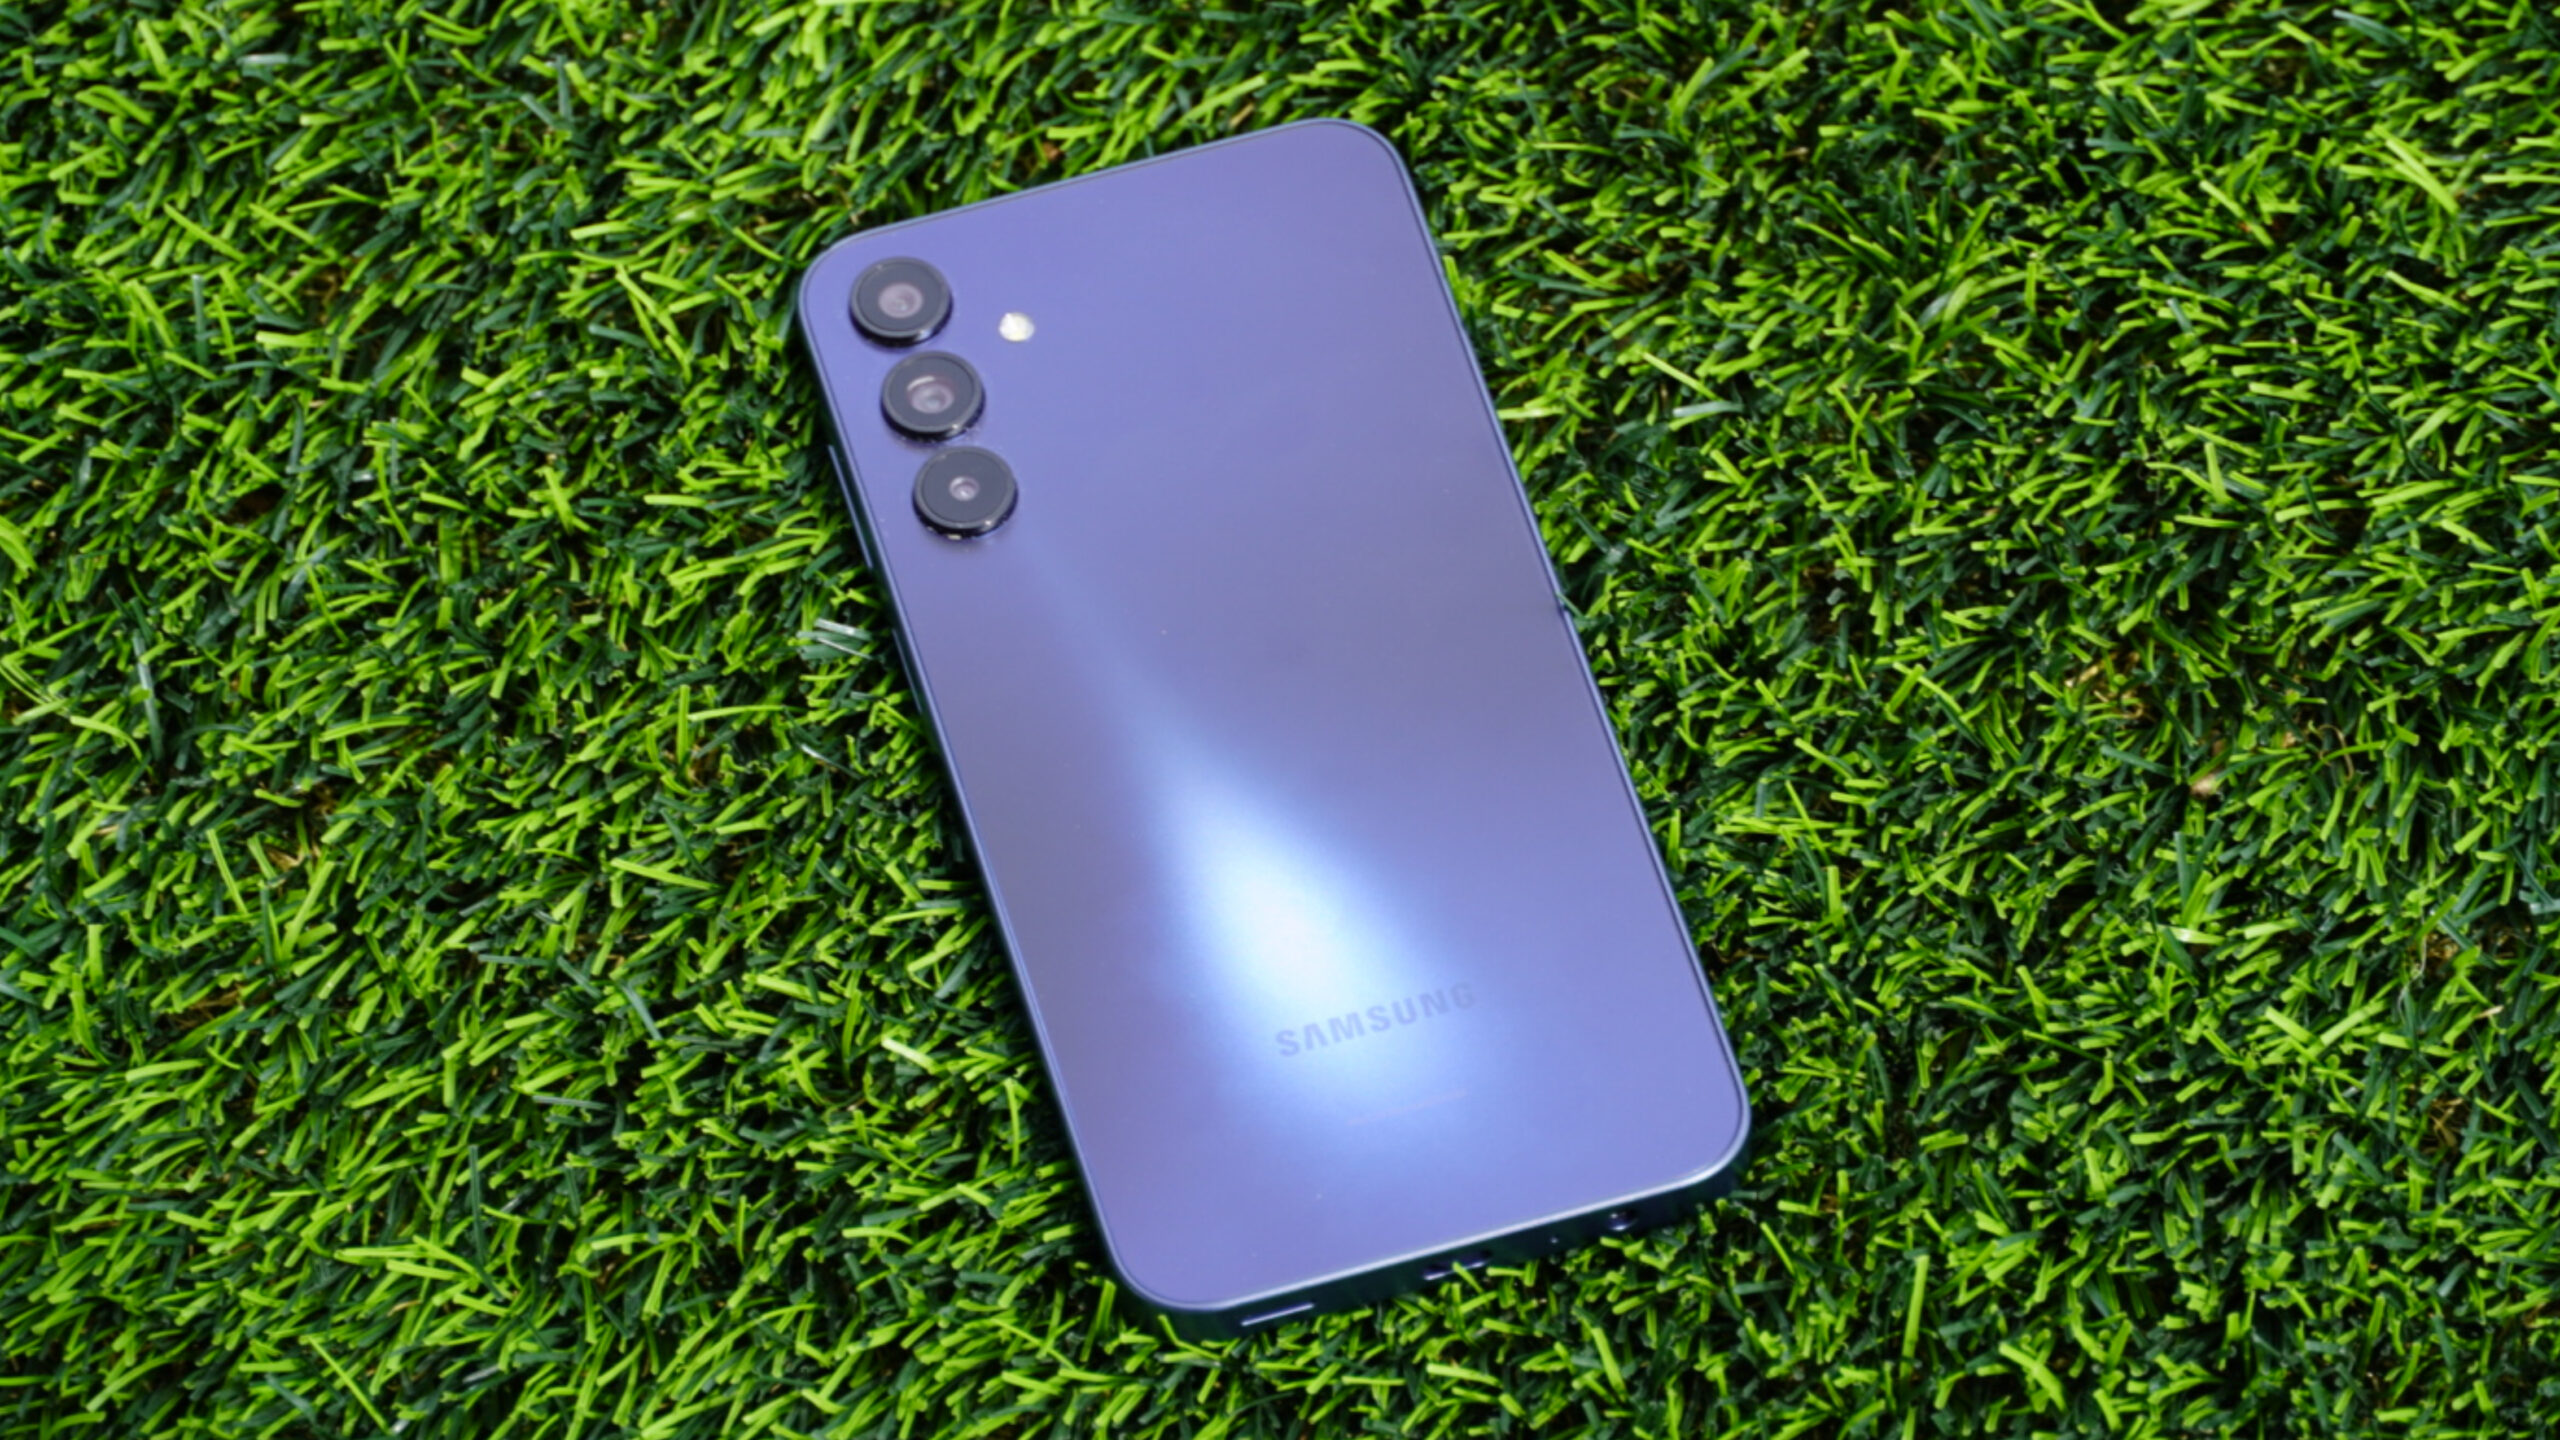 The Samsung Galaxy A15 5G on a patch of grass.